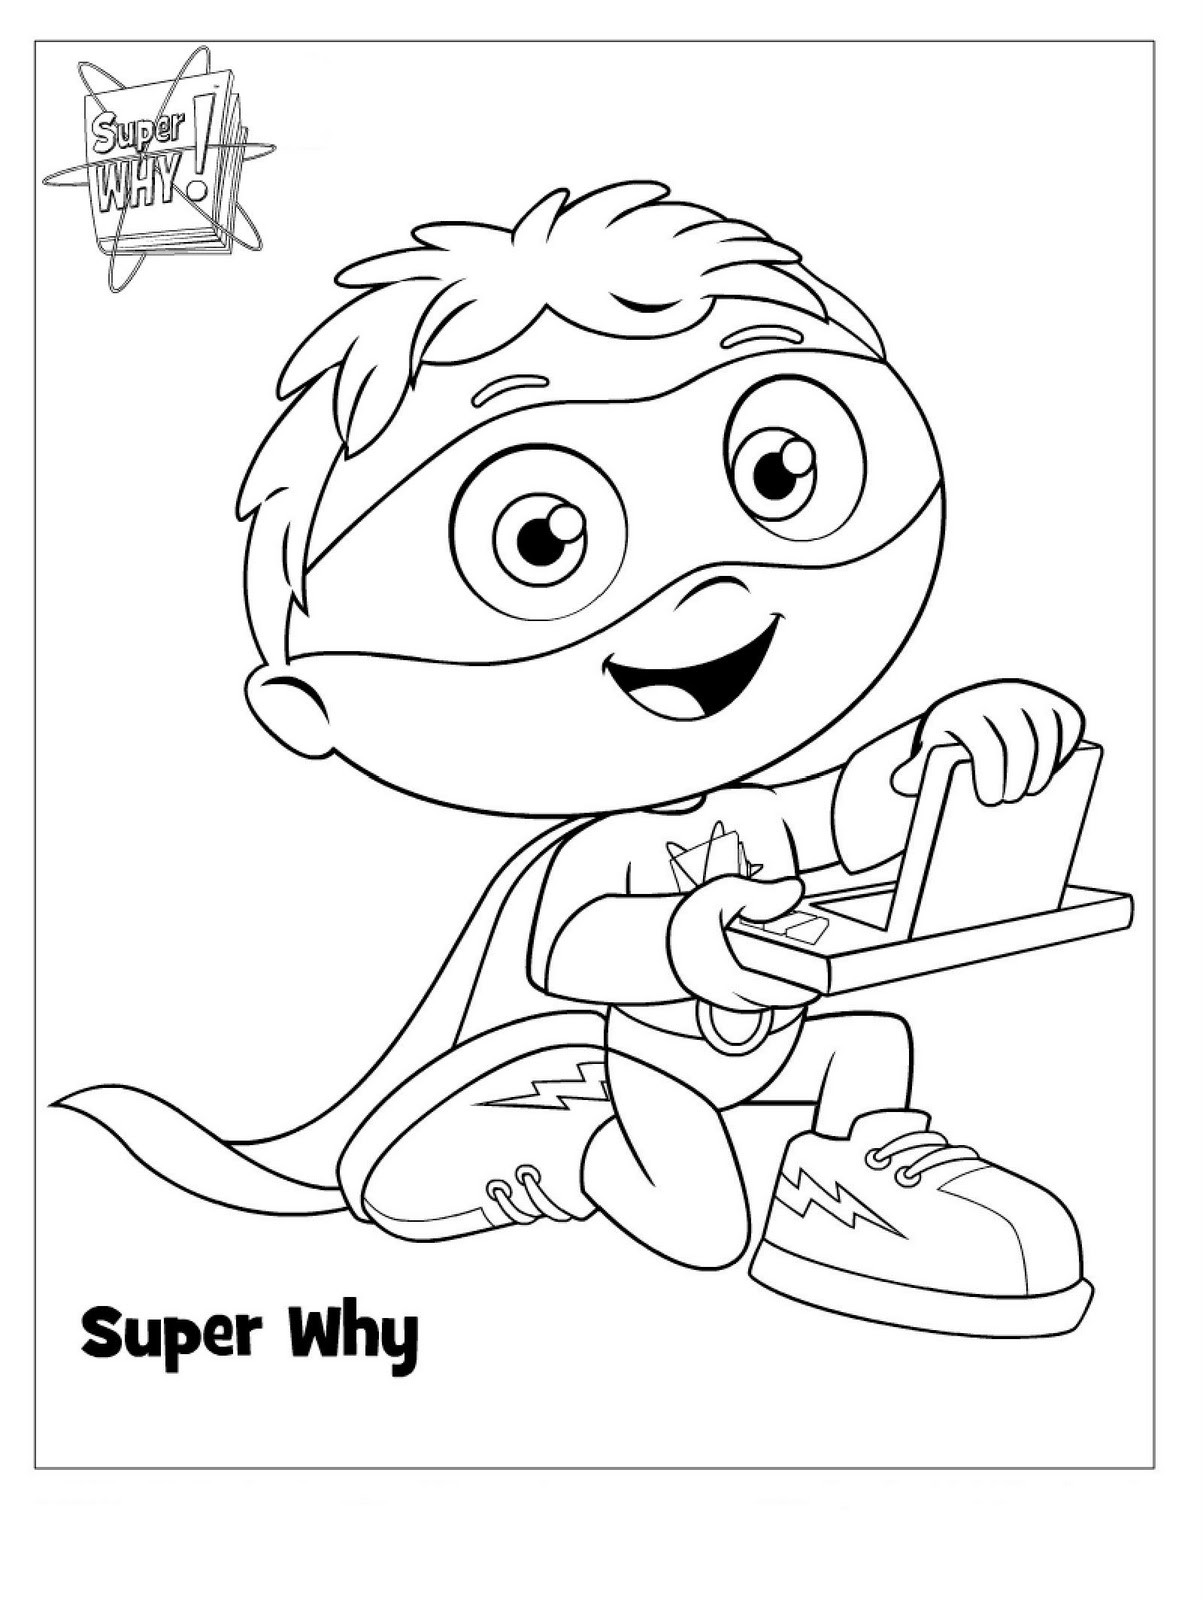 Coloring Sheets For Kids Com
 Super Why Coloring Pages Best Coloring Pages For Kids